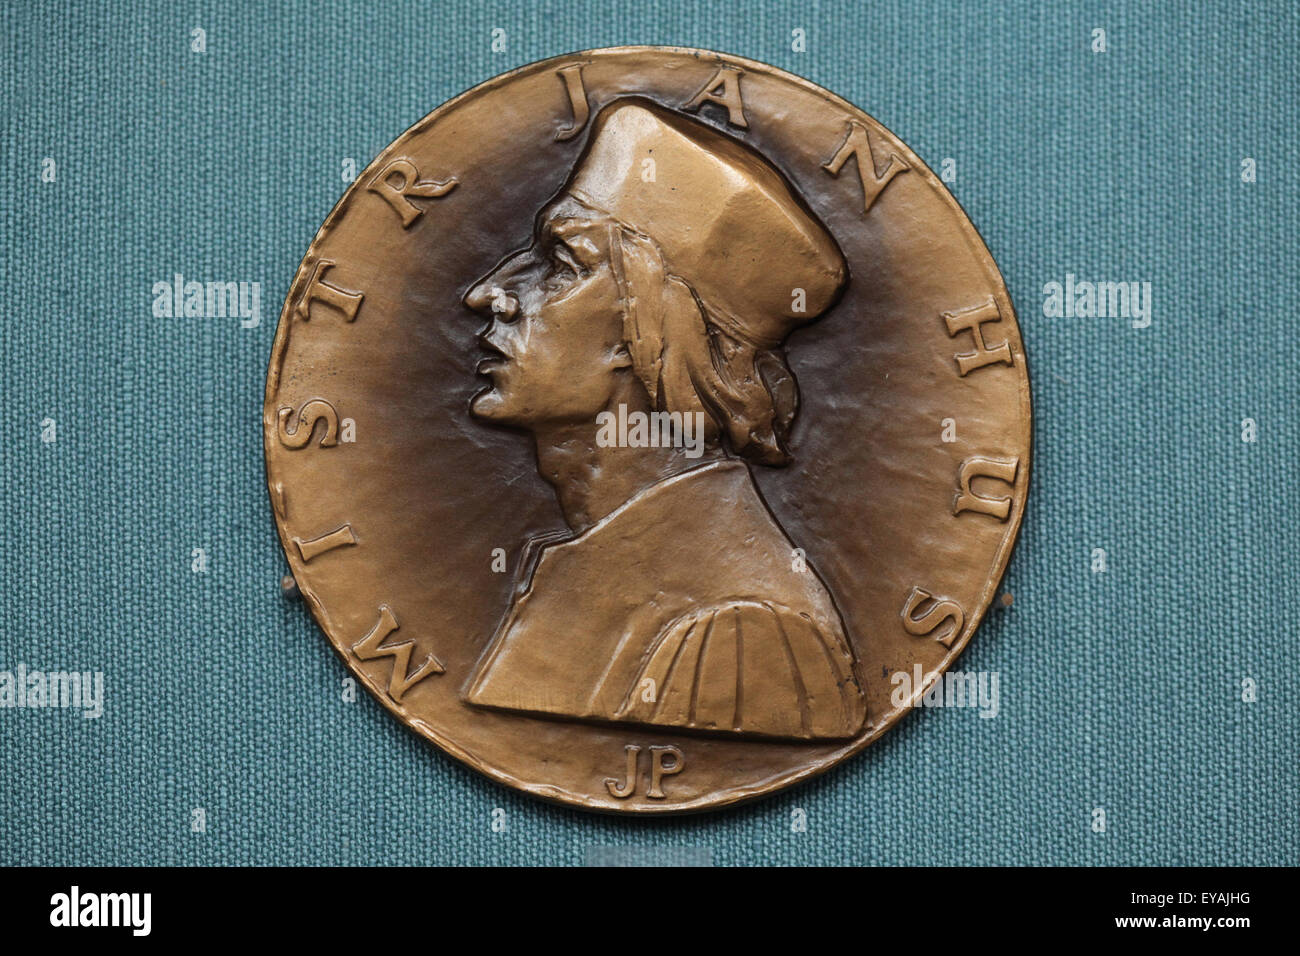 Master Jan Hus. Commemorative medal designed by Czech sculptor and medal engraver Jiri Pradler, 1965. Kunsthistorisches Museum, Vienna, Austria. The medal commemorates the 550th anniversary of the martyrdom of Master Jan Hus. Stock Photo